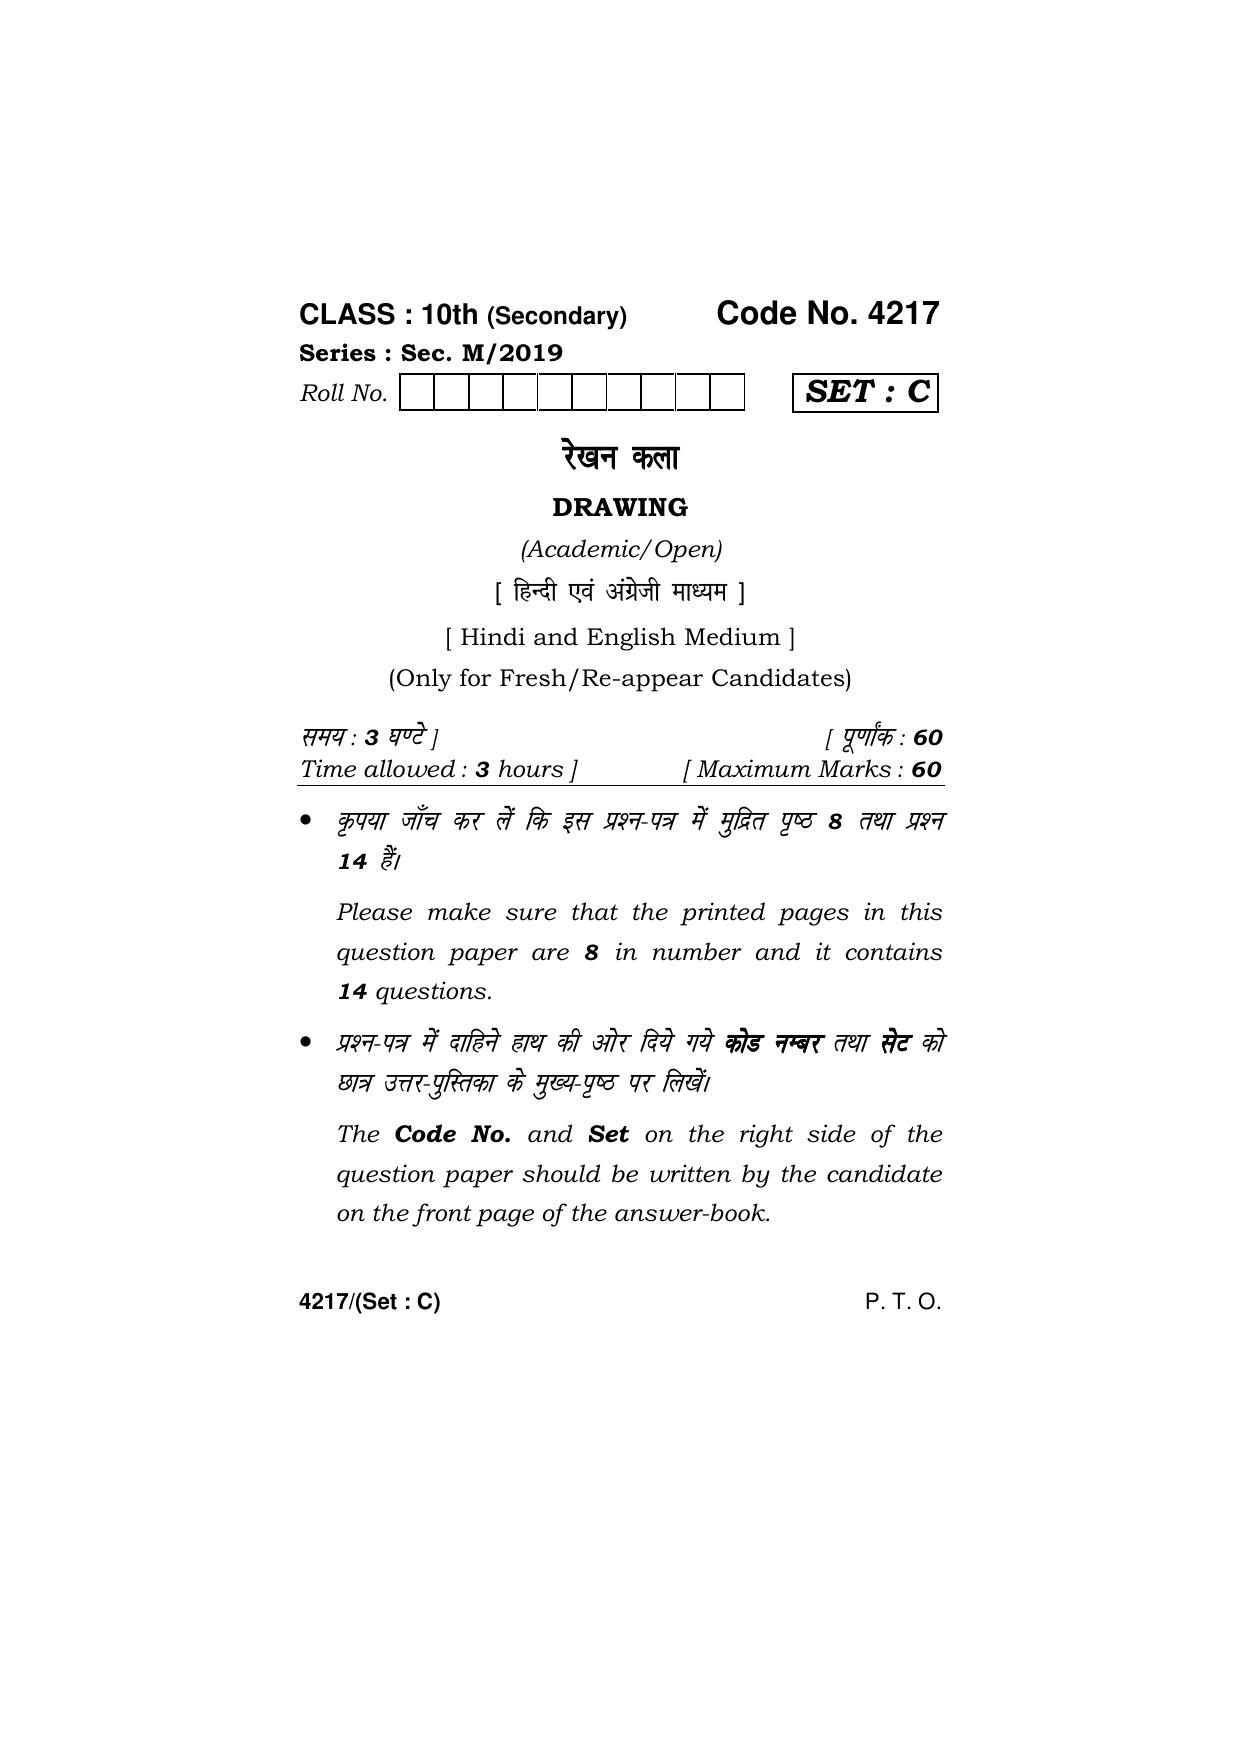 Haryana Board HBSE Class 10 Drawing (All Set) 2019 Question Paper - Page 17